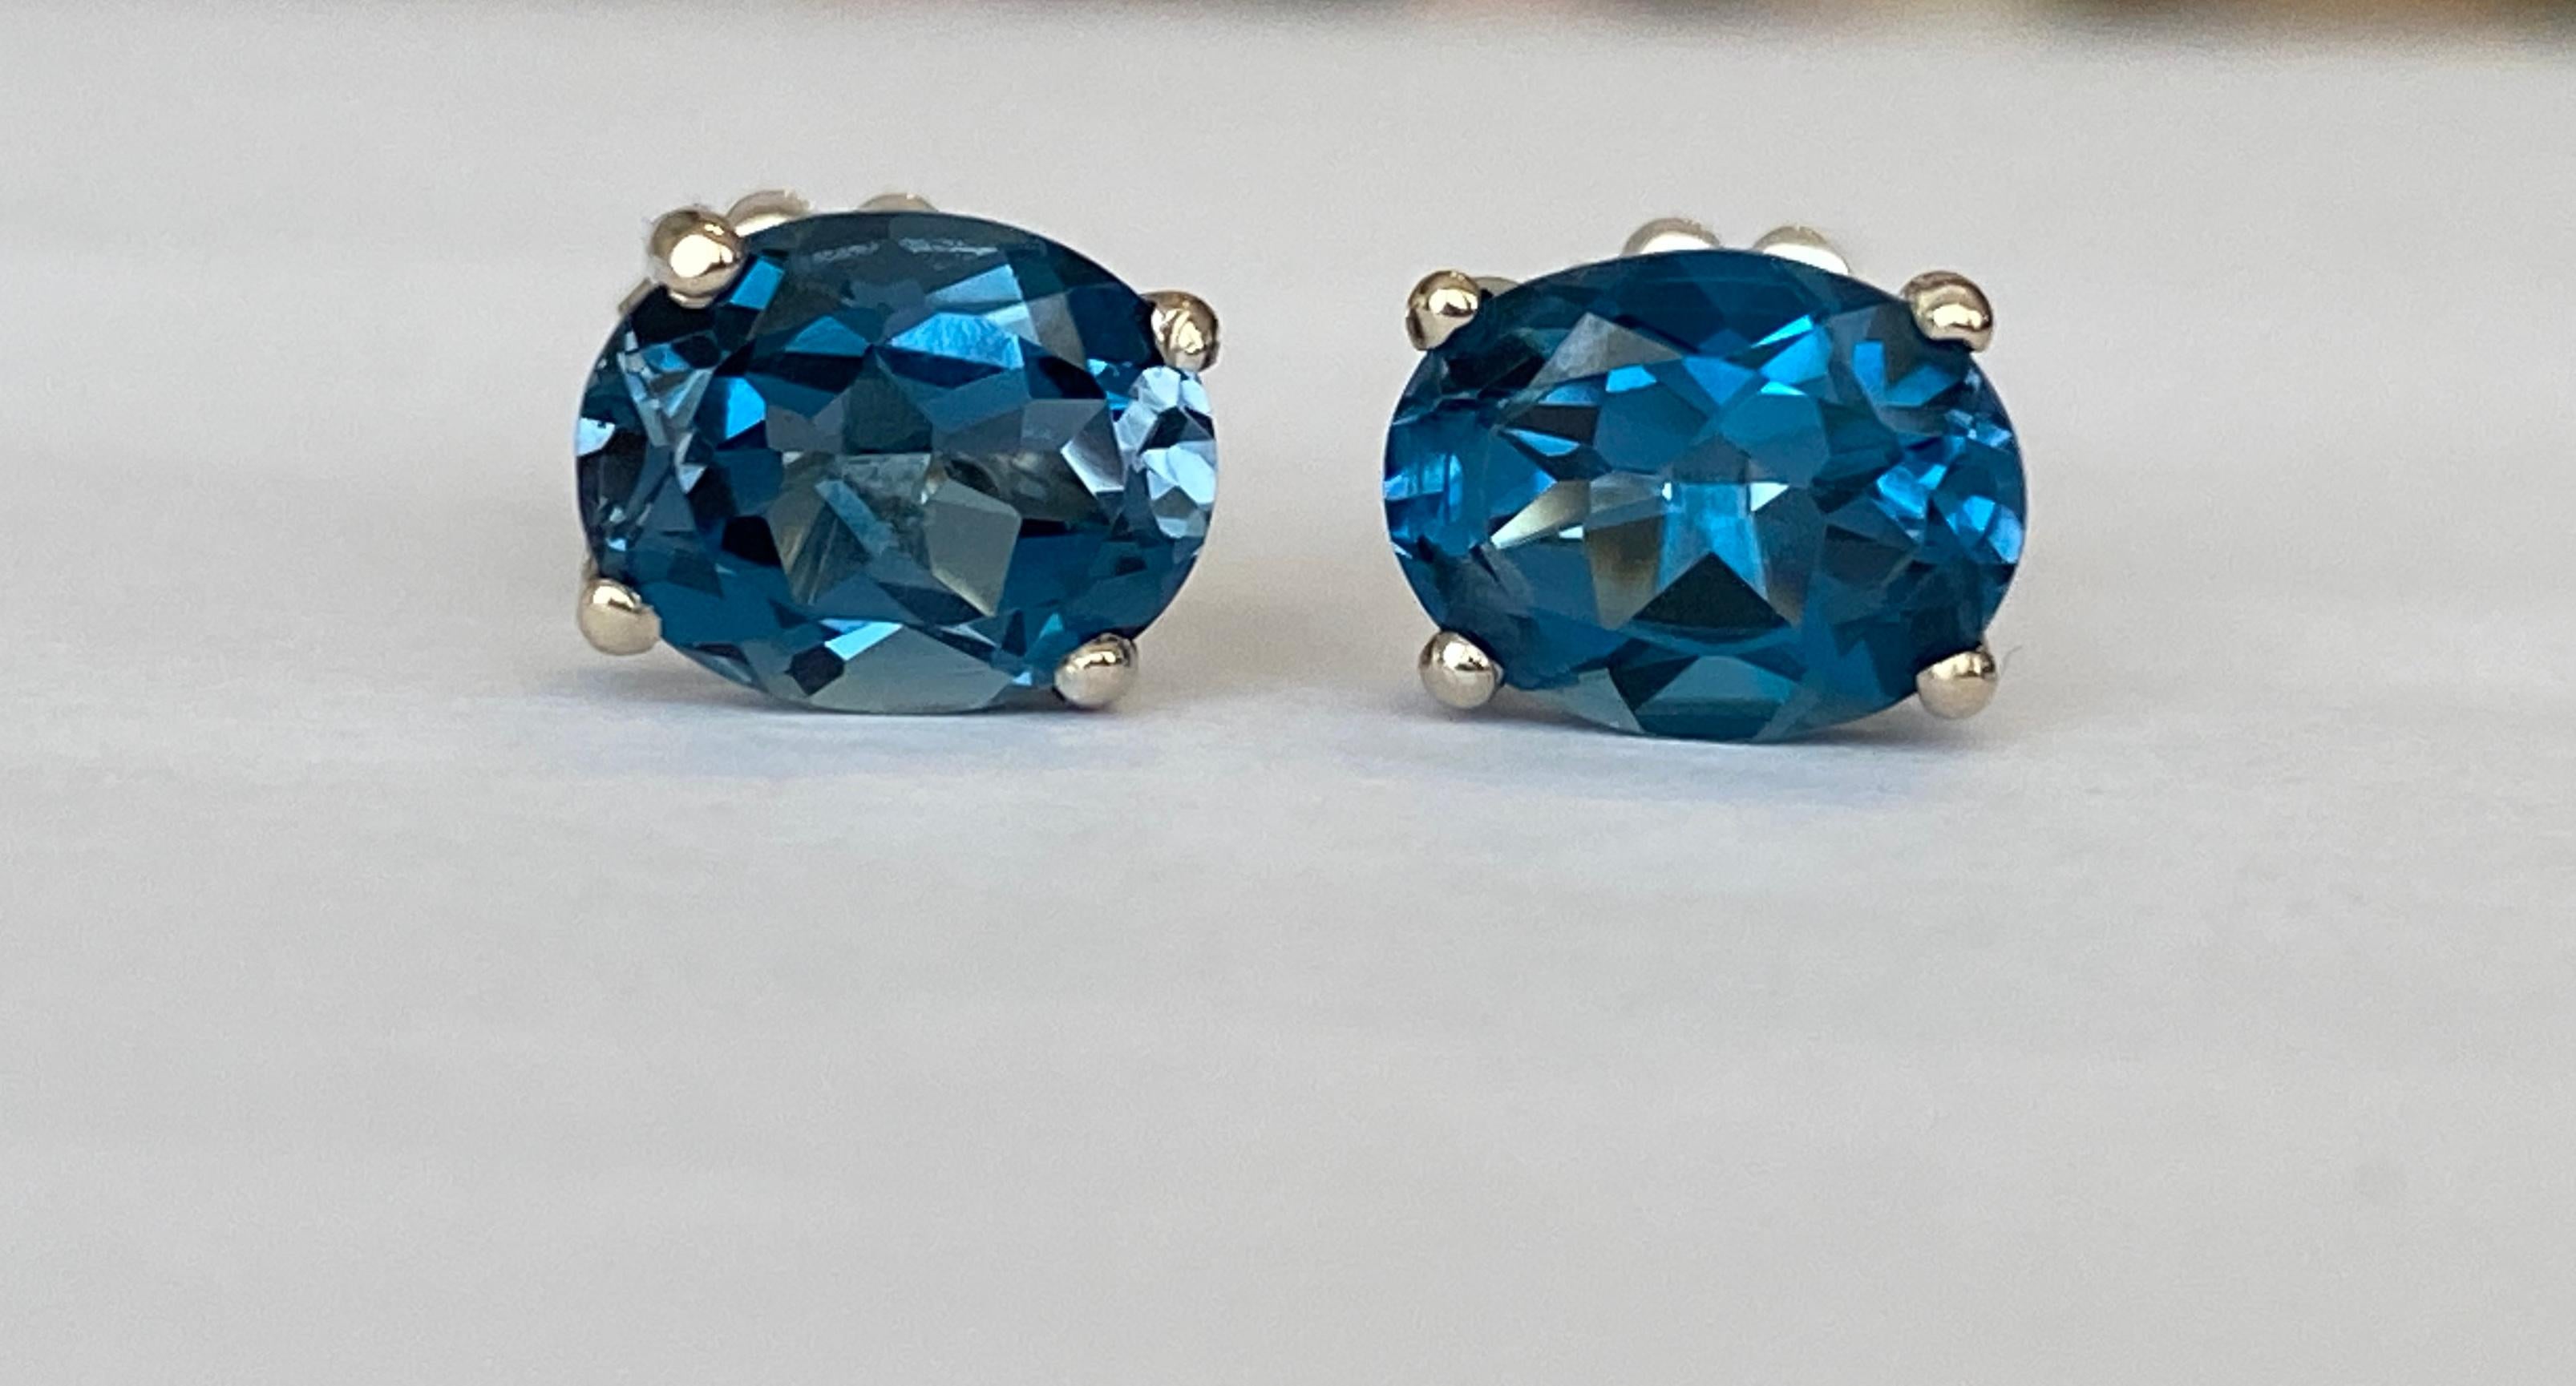 Beautiful 18 carat gold ear studs in new condition with two pieces of London Blue Topaz, approx. 4.5 ct in total
Gold content: 18 kt (hallmarked)
London Blue Topaz: 7m*9mm
But studs:17mm*19mm
Weight: 2.9 grams
Working for couple of years for one of